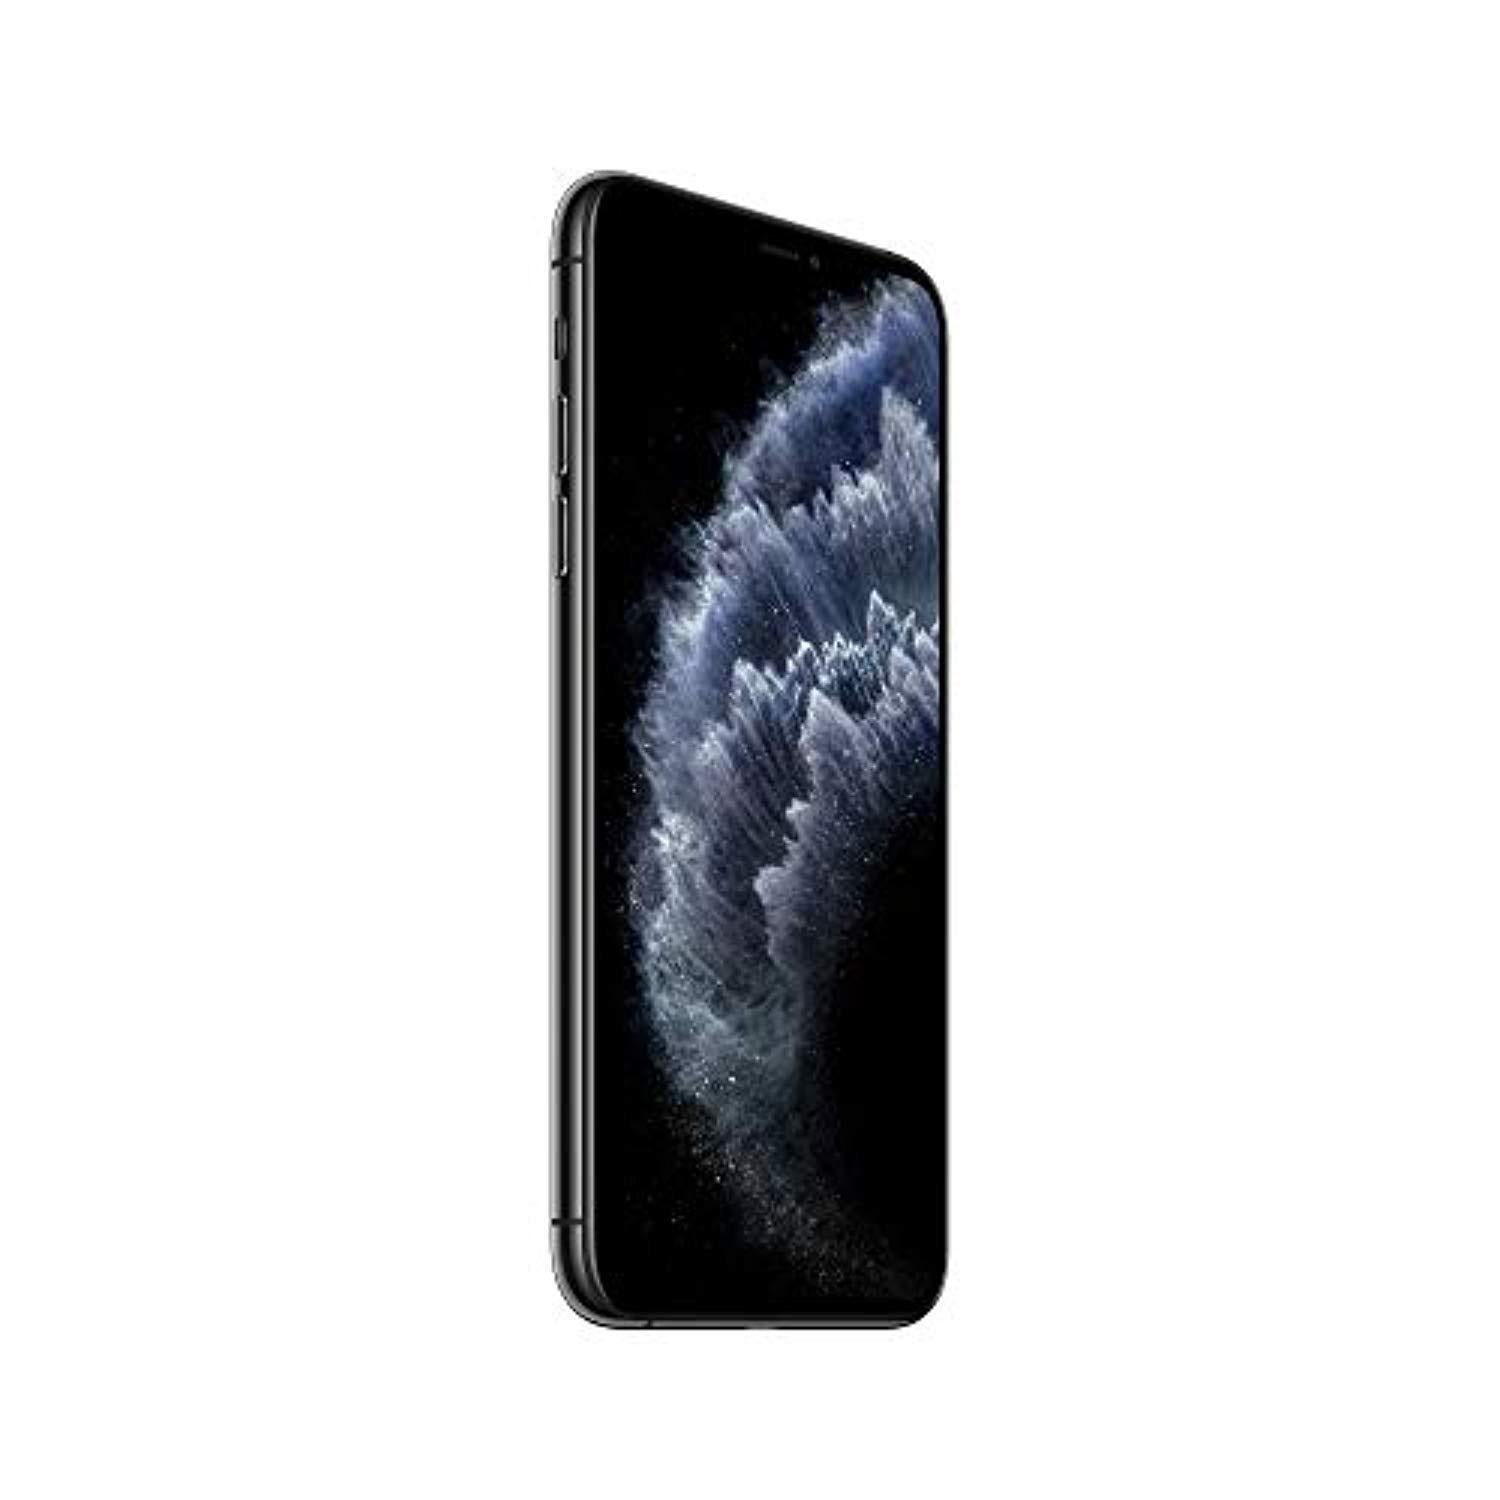 Apple iPhone 11 Pro Max (64GB) - Space Grey - Offer Games